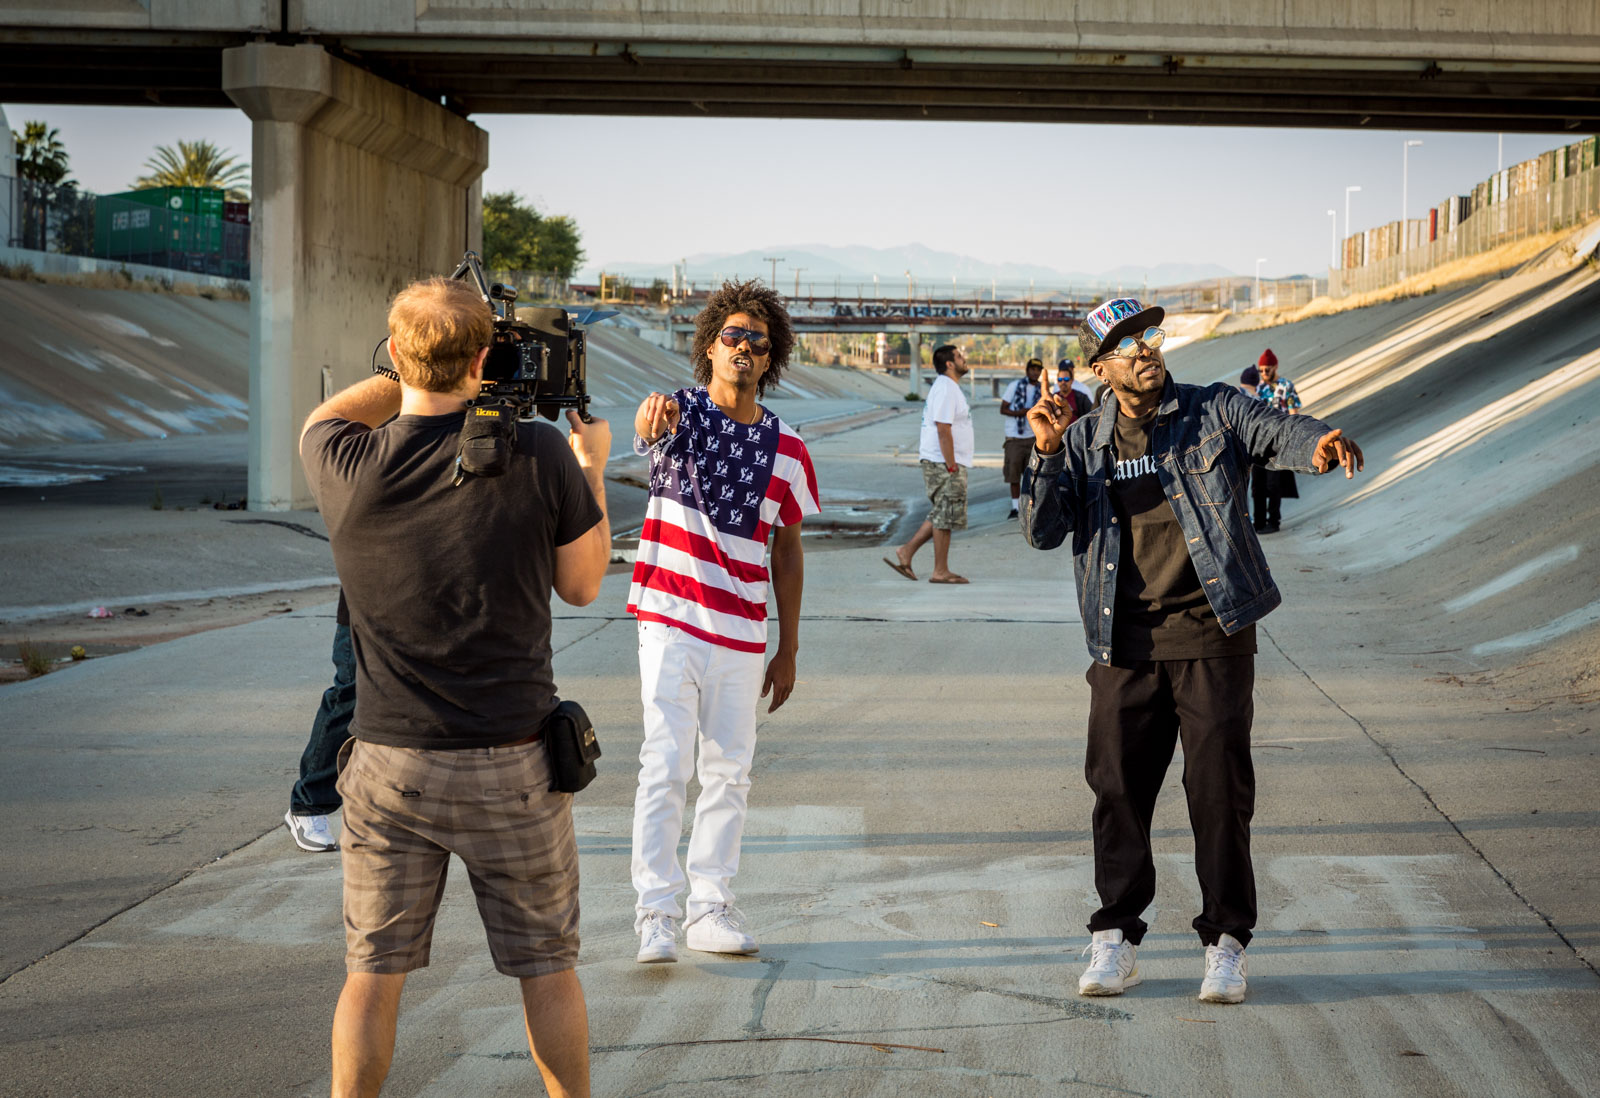 Yahoo! Music Debuts “Sins” The New Music Video from The Pharcyde ...